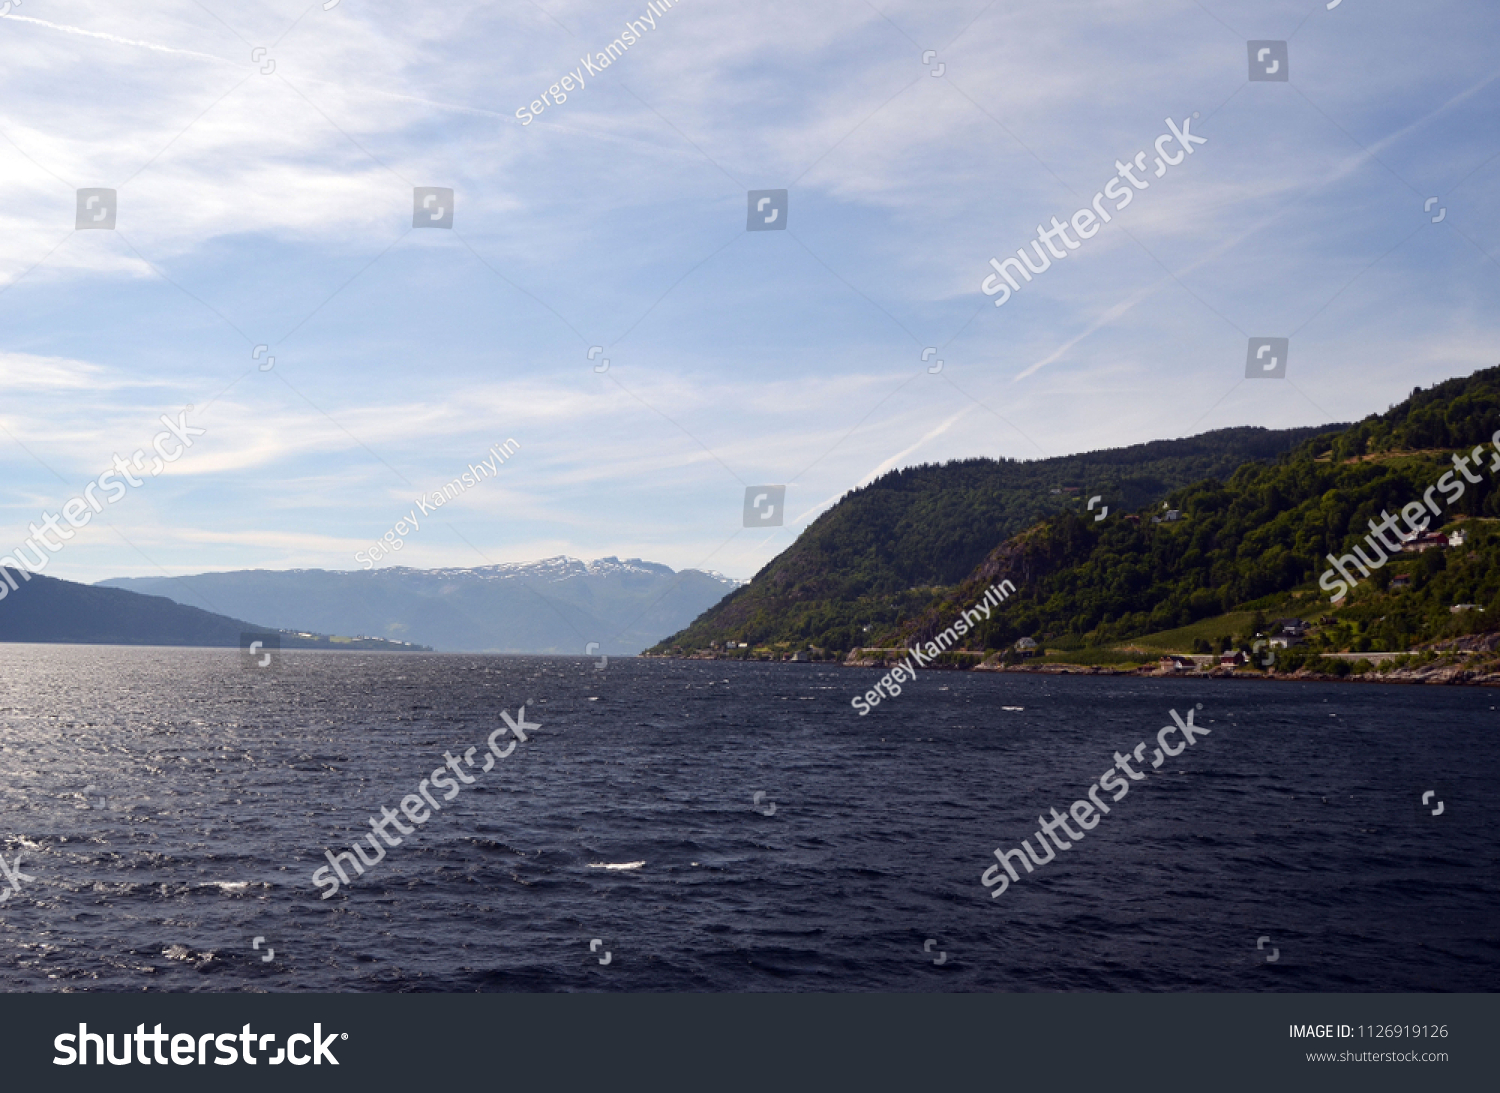 Mountains and fjord in Norway. Clouds and blue sky. Beautiful stunning views of mountains, water, sky, clouds and sun. Norwegian nature. Sognefjord #1126919126